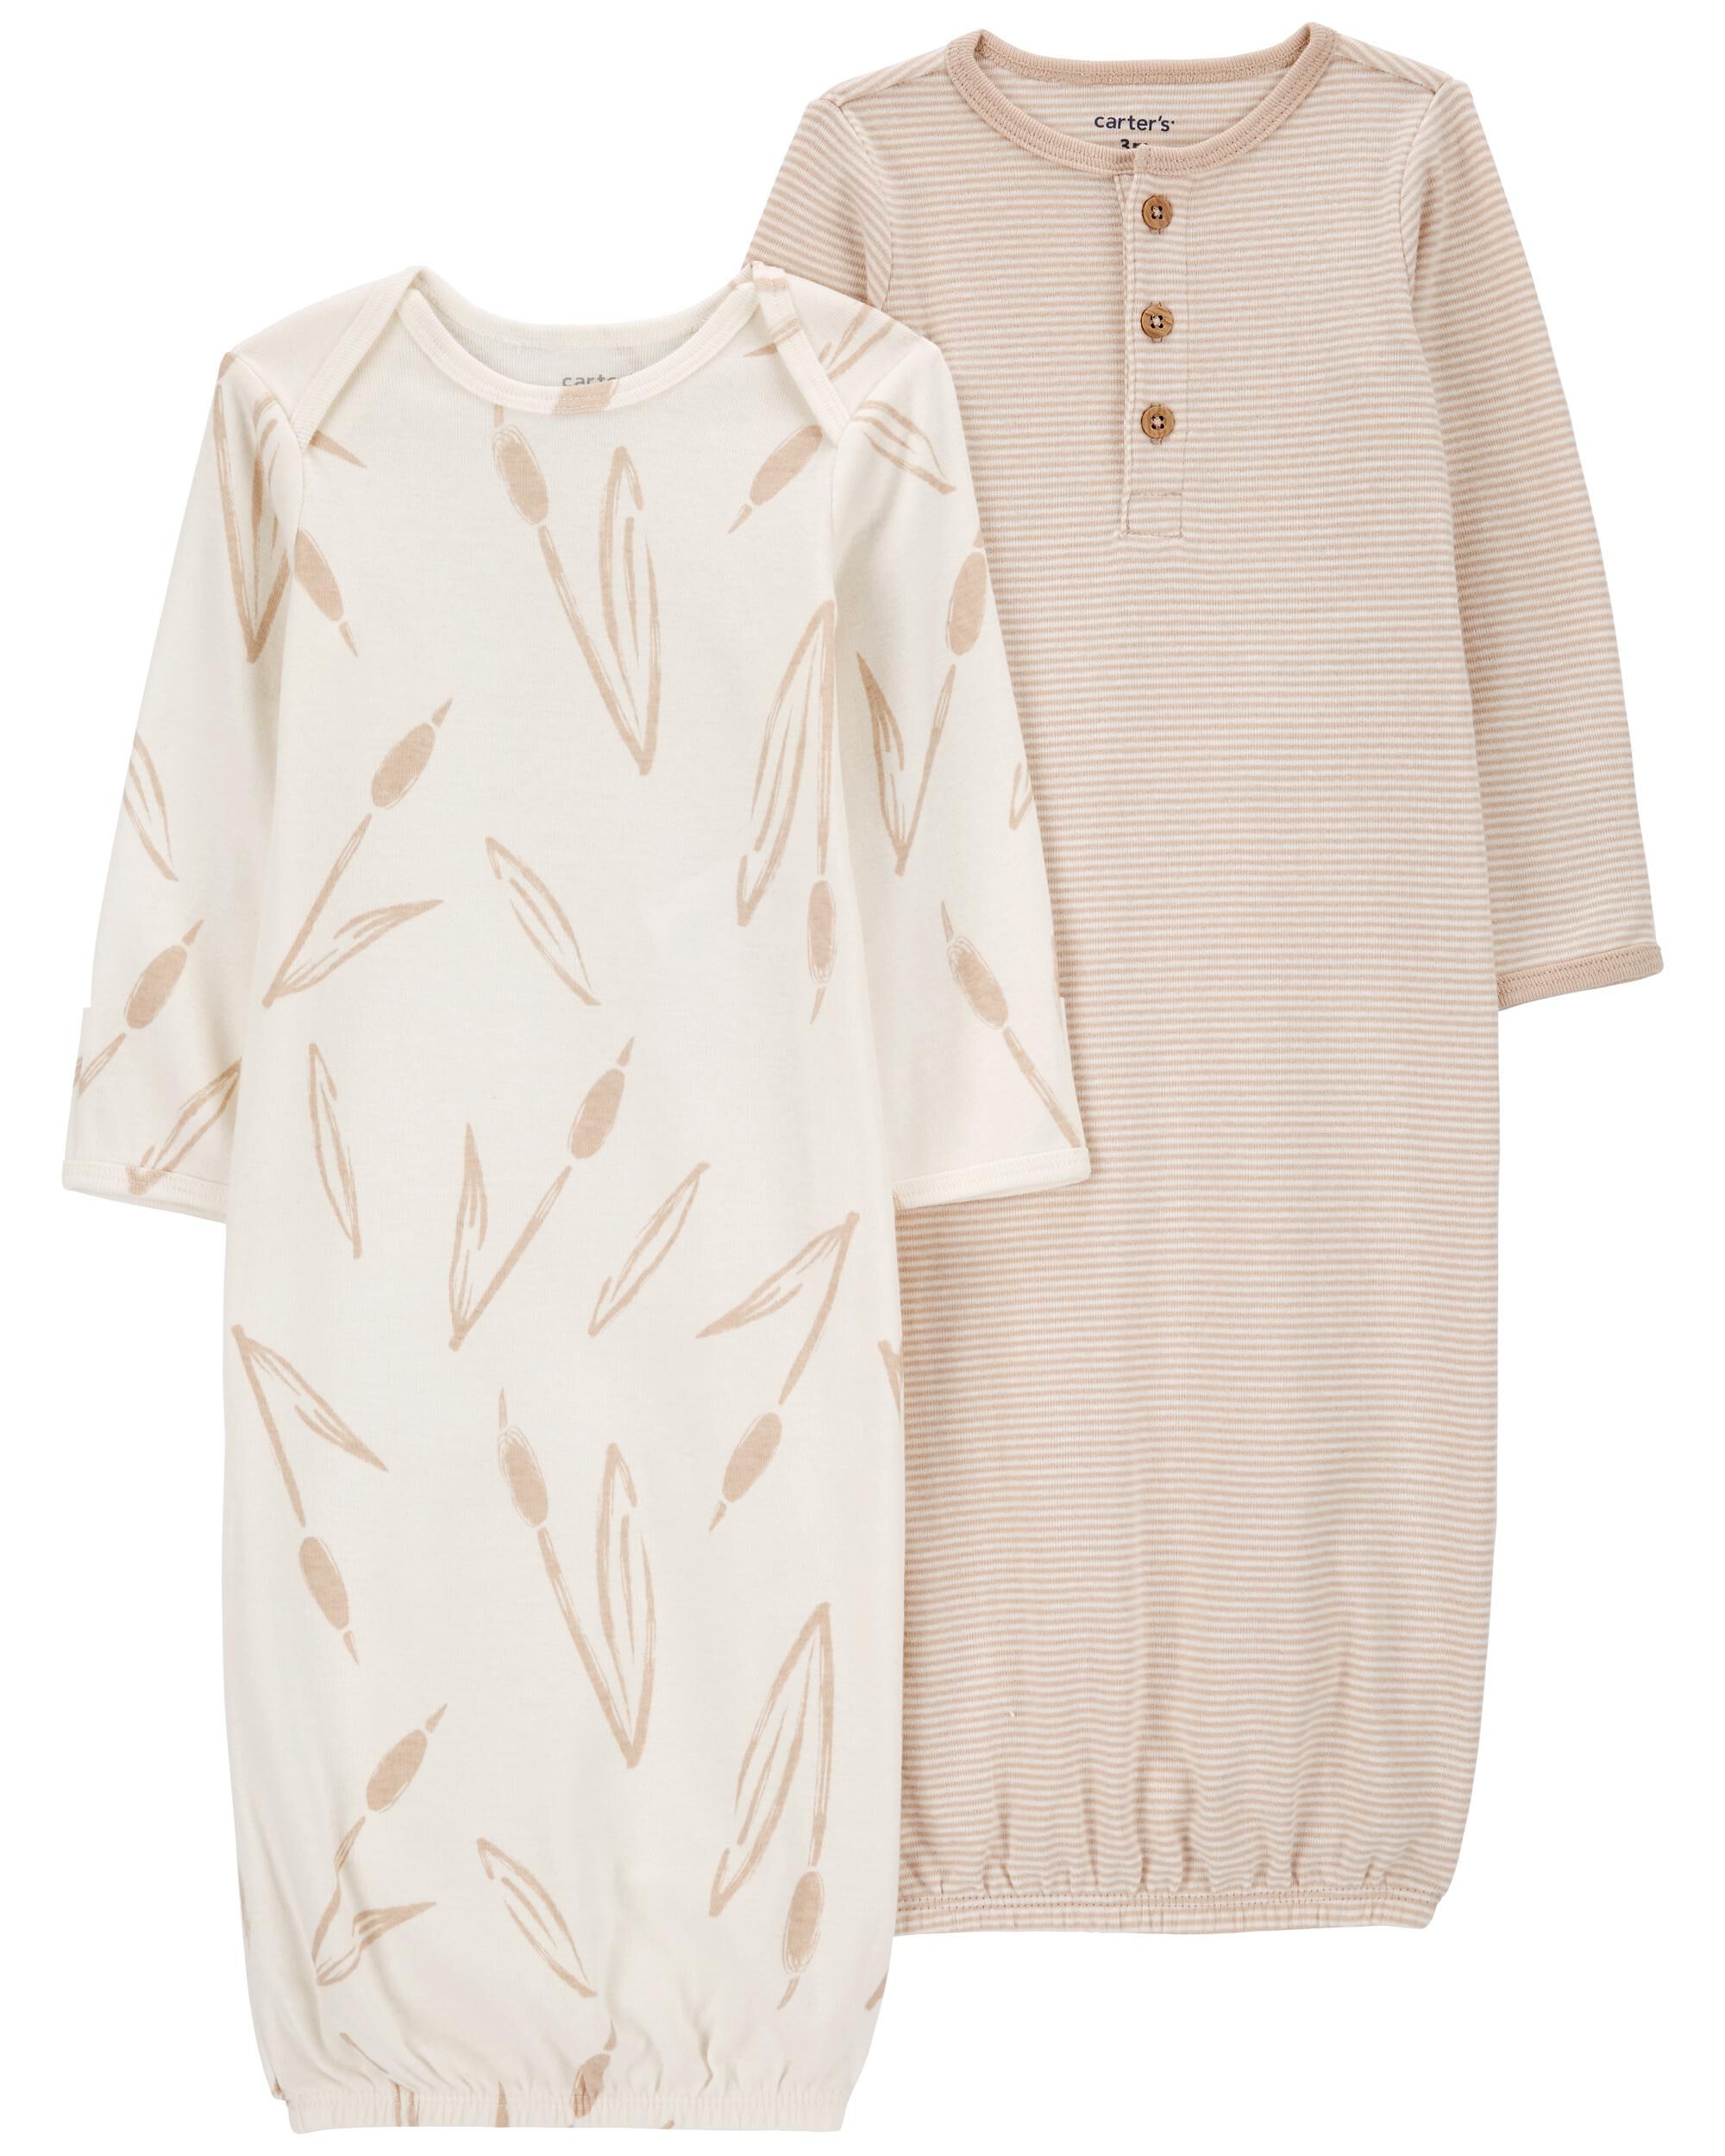 Baby 2-Pack Sleeper Gowns Carter's